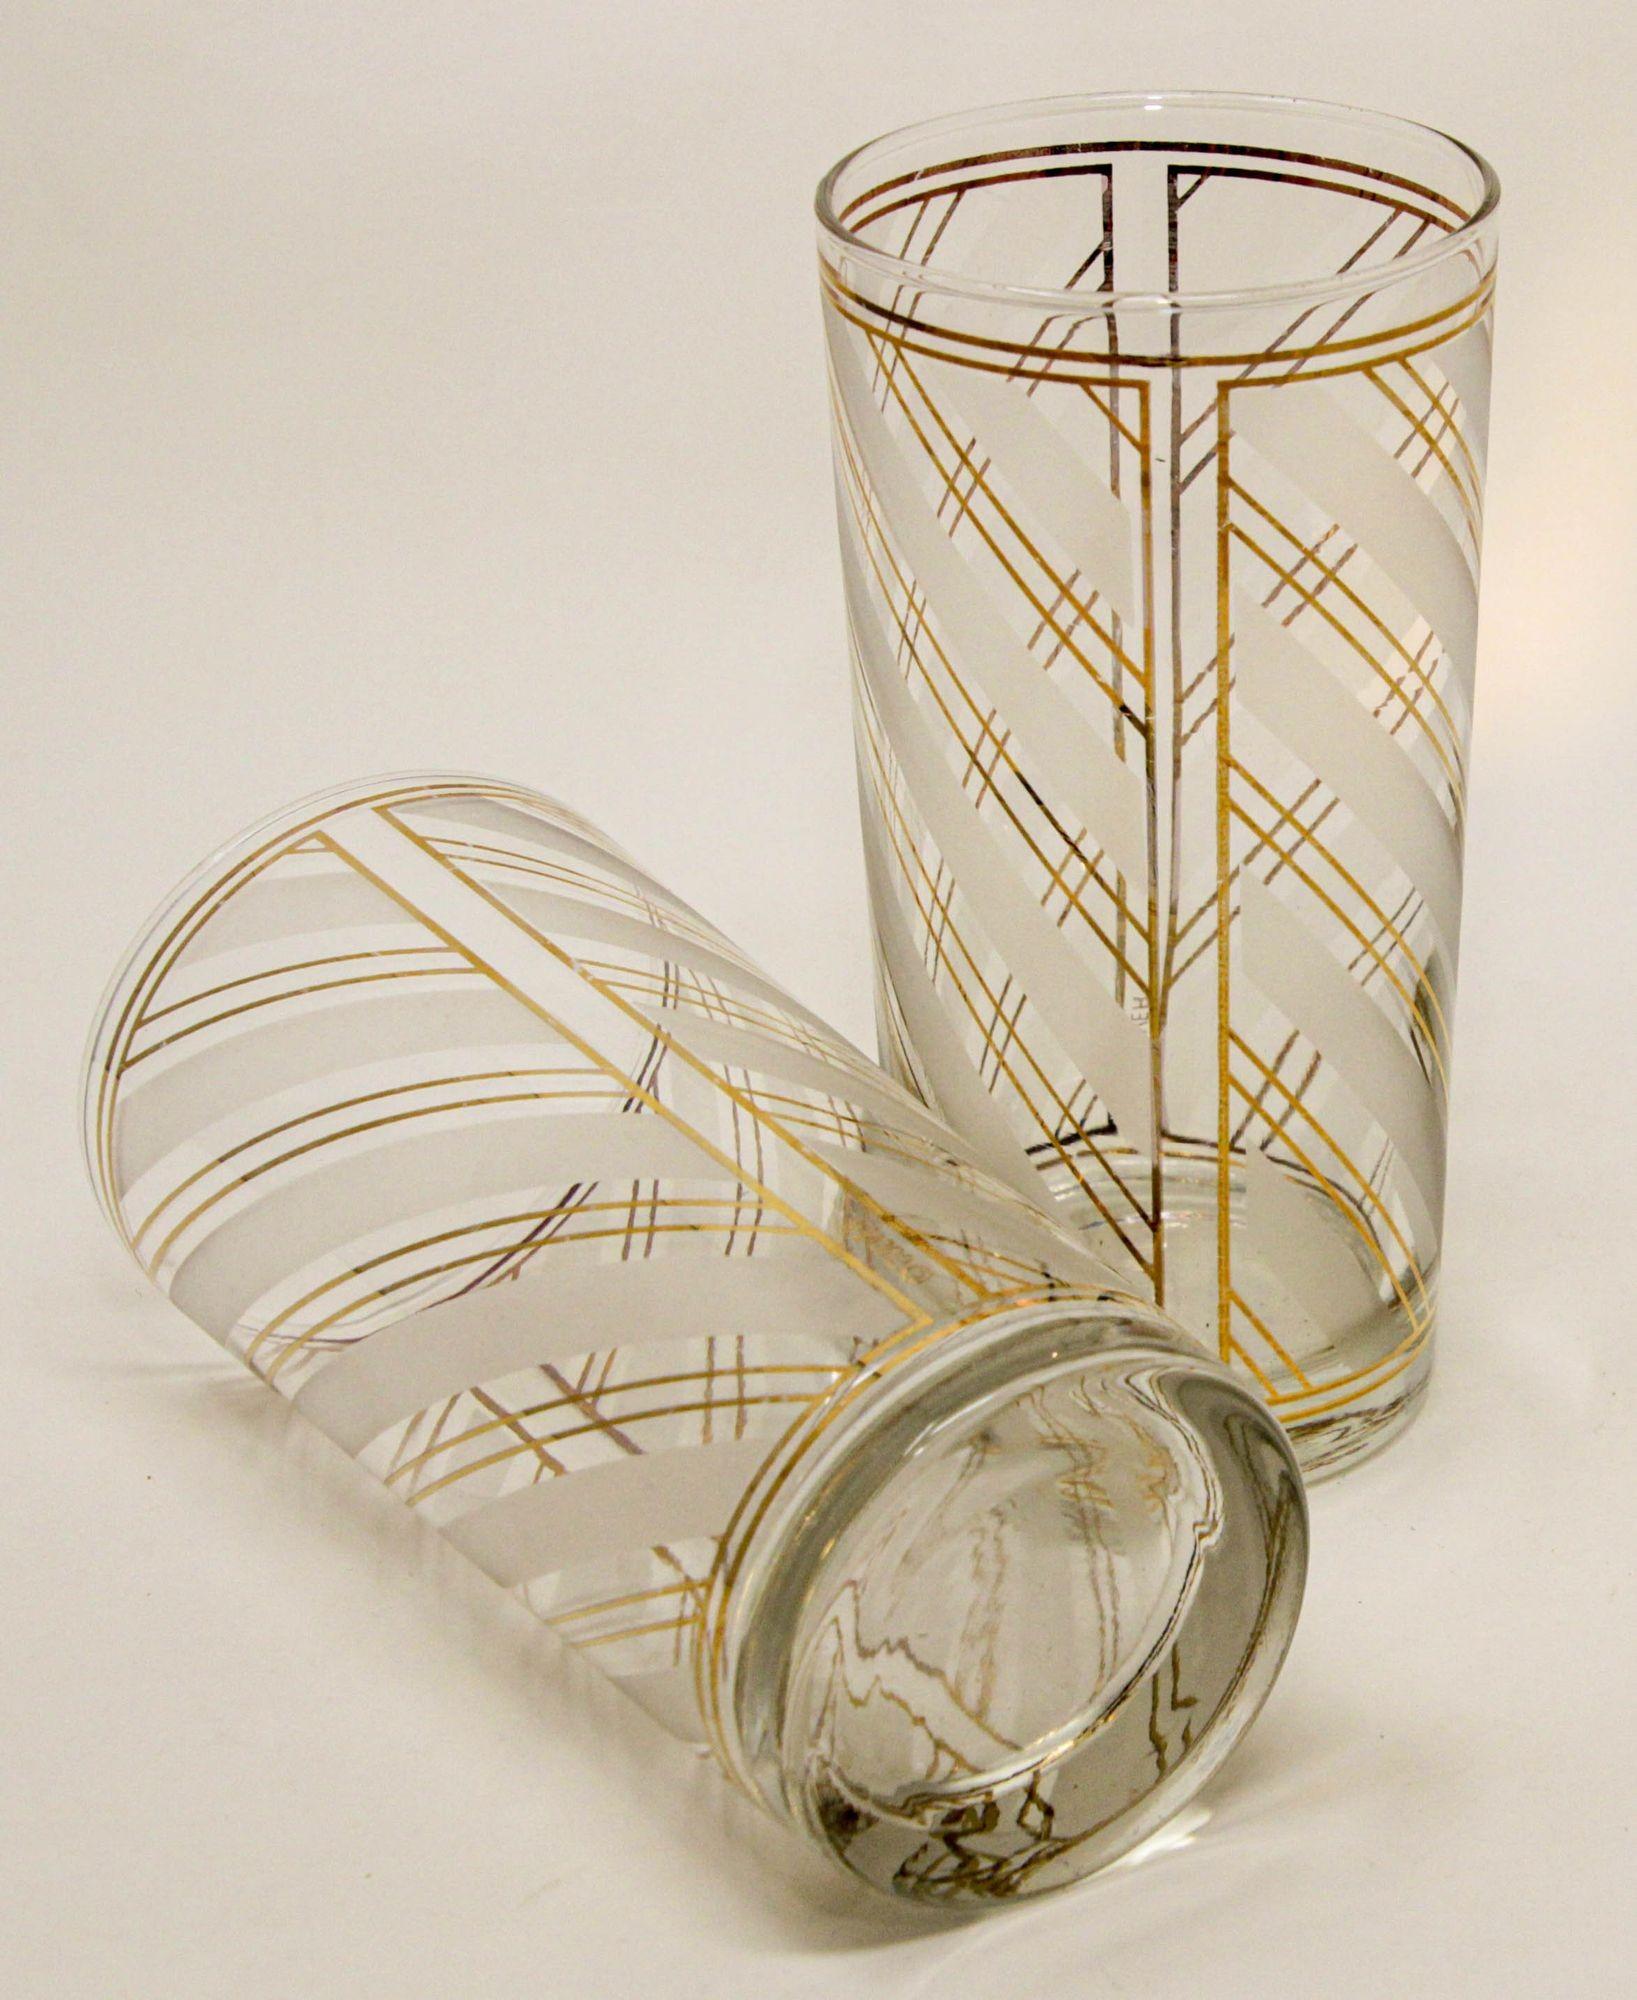 Vintage Art Deco Culver Gold Striped Set of 2 High Ball Tumblers For Sale 1